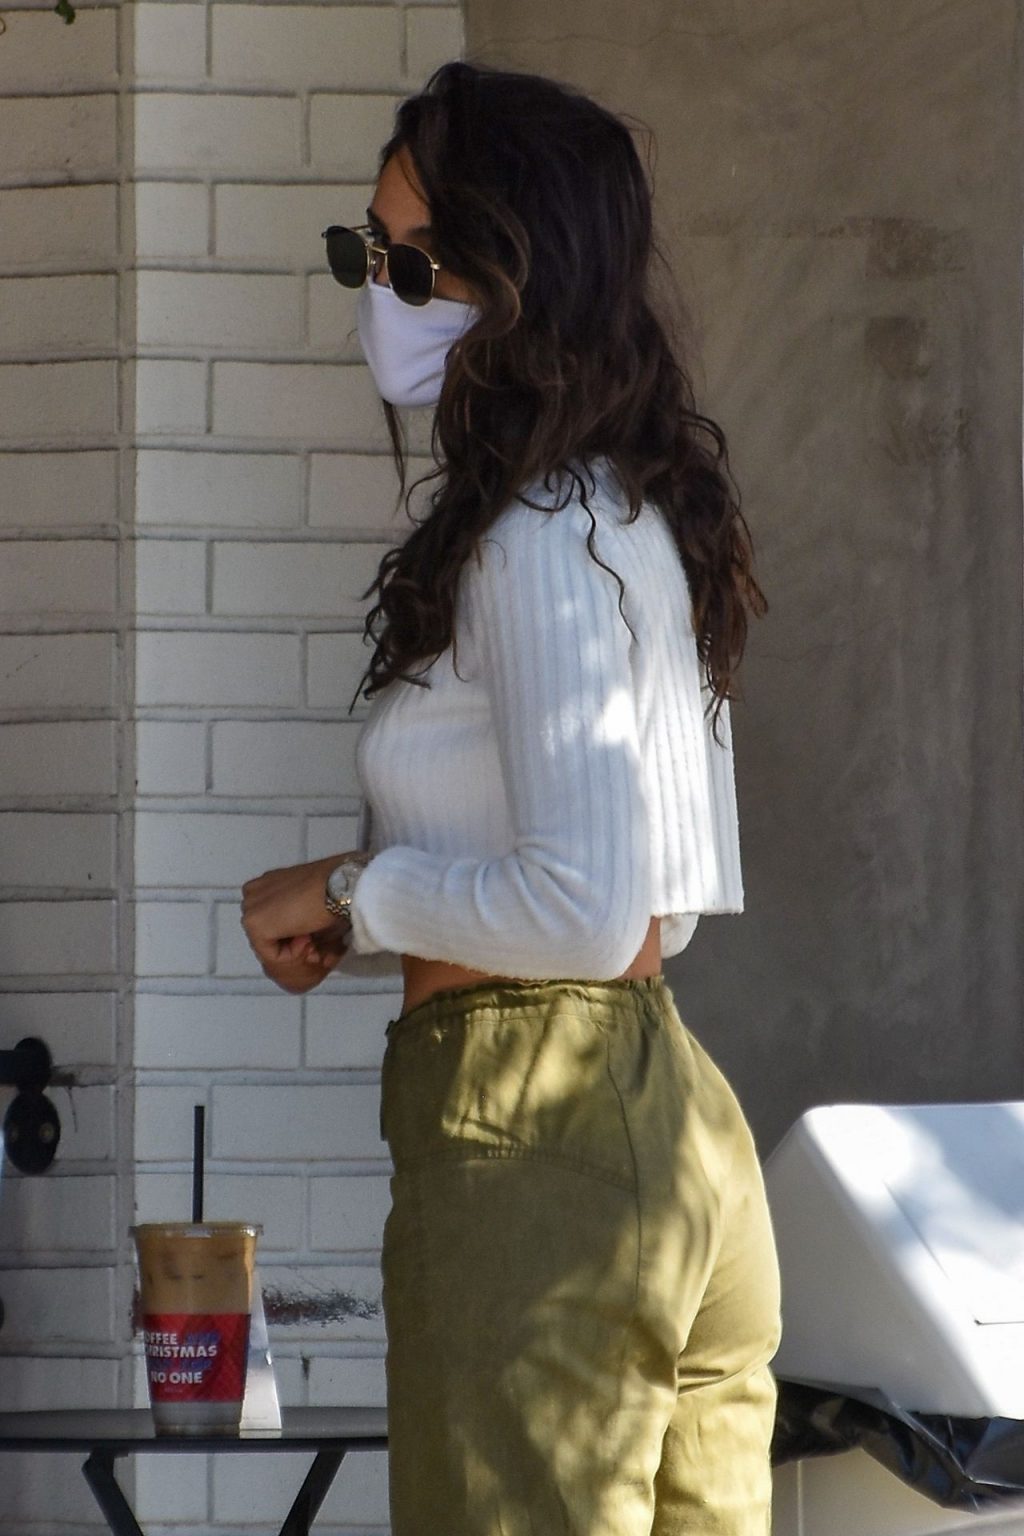 Eiza Gonzalez Bares Her Toned Midriff in a Crop Top During a Coffee Run in LA (59 Photos)